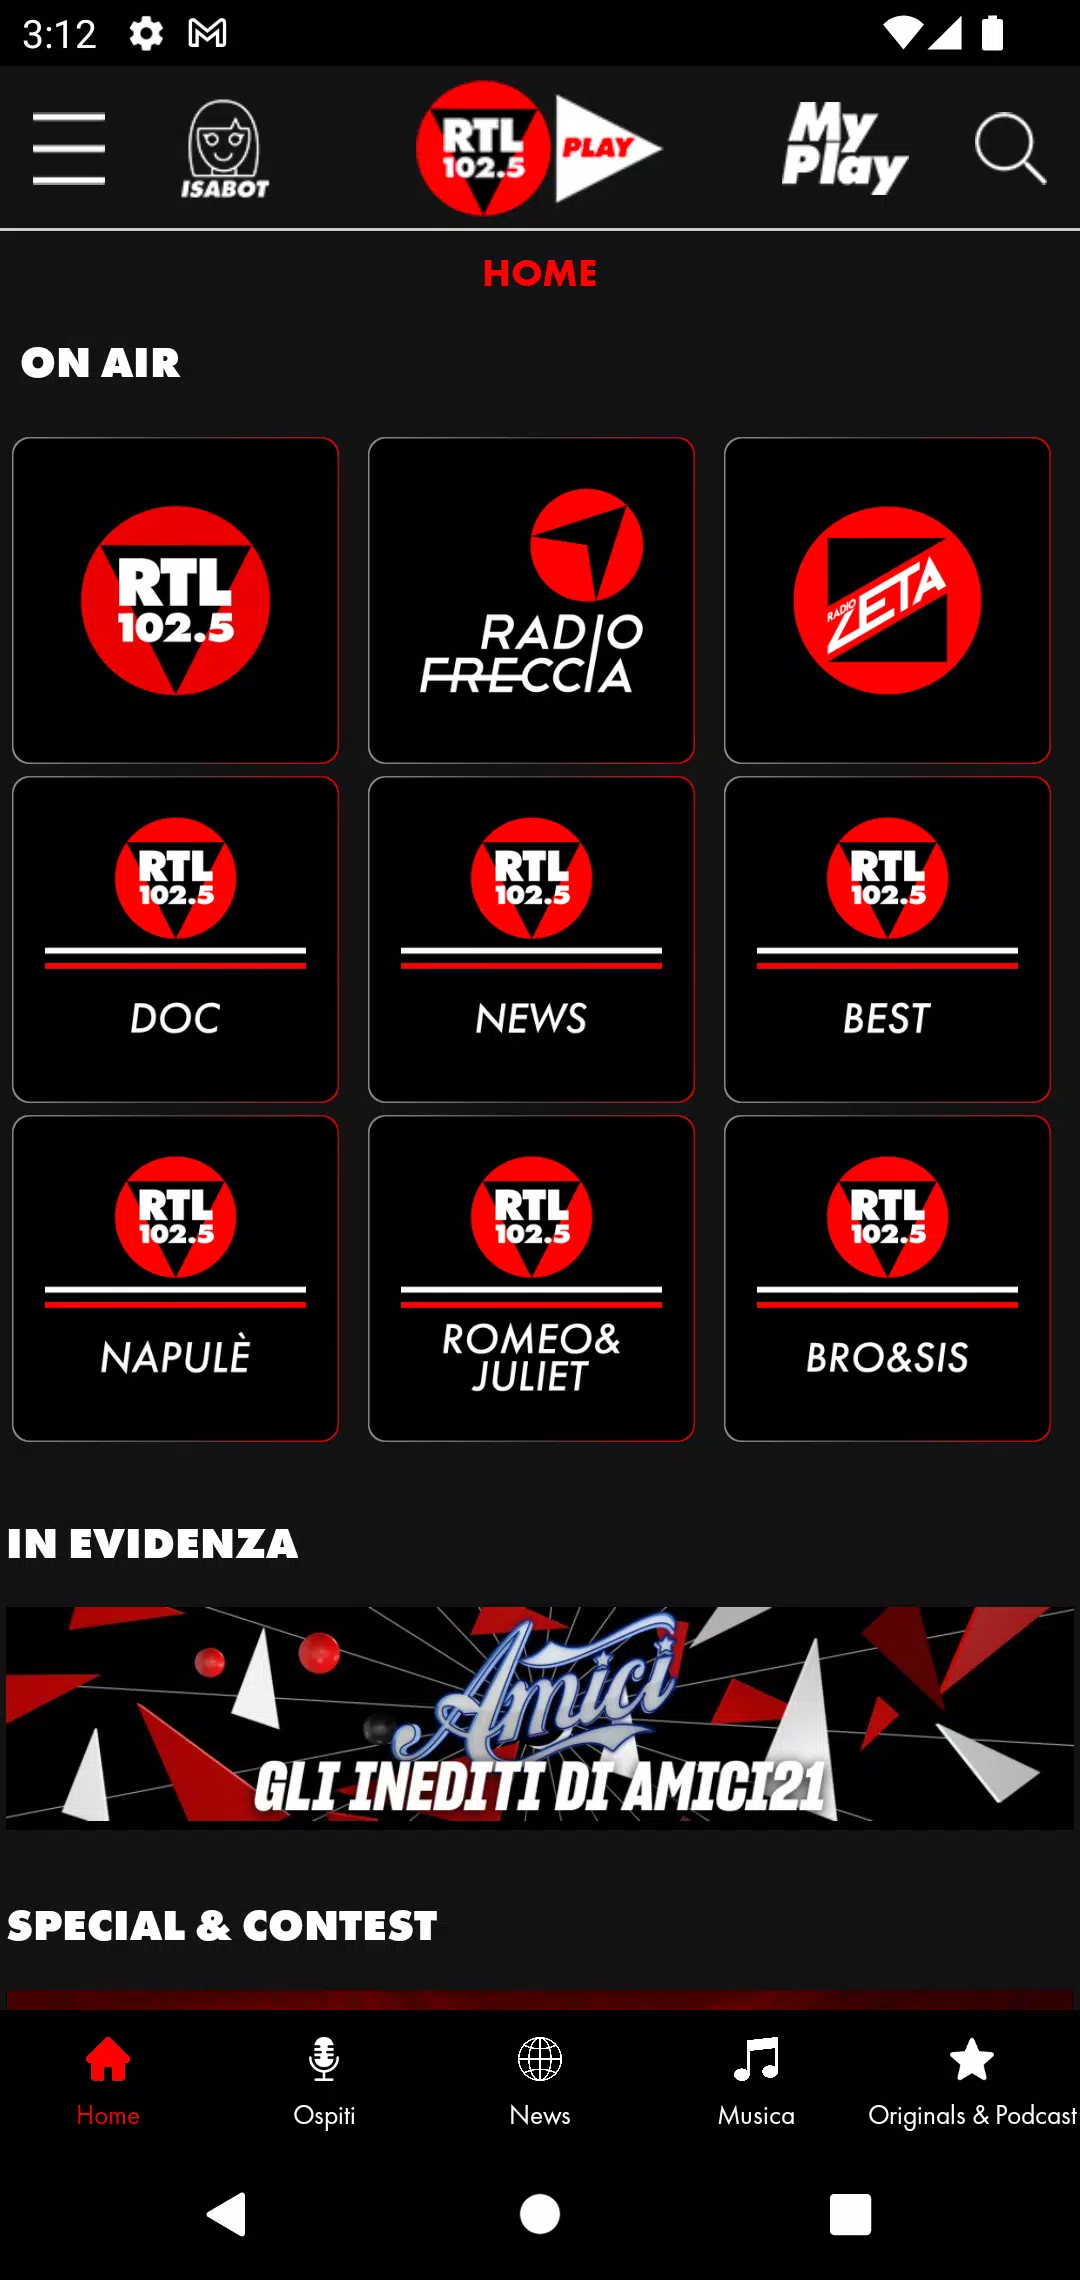 RTL 102.5 PLAY for Android - APK Download